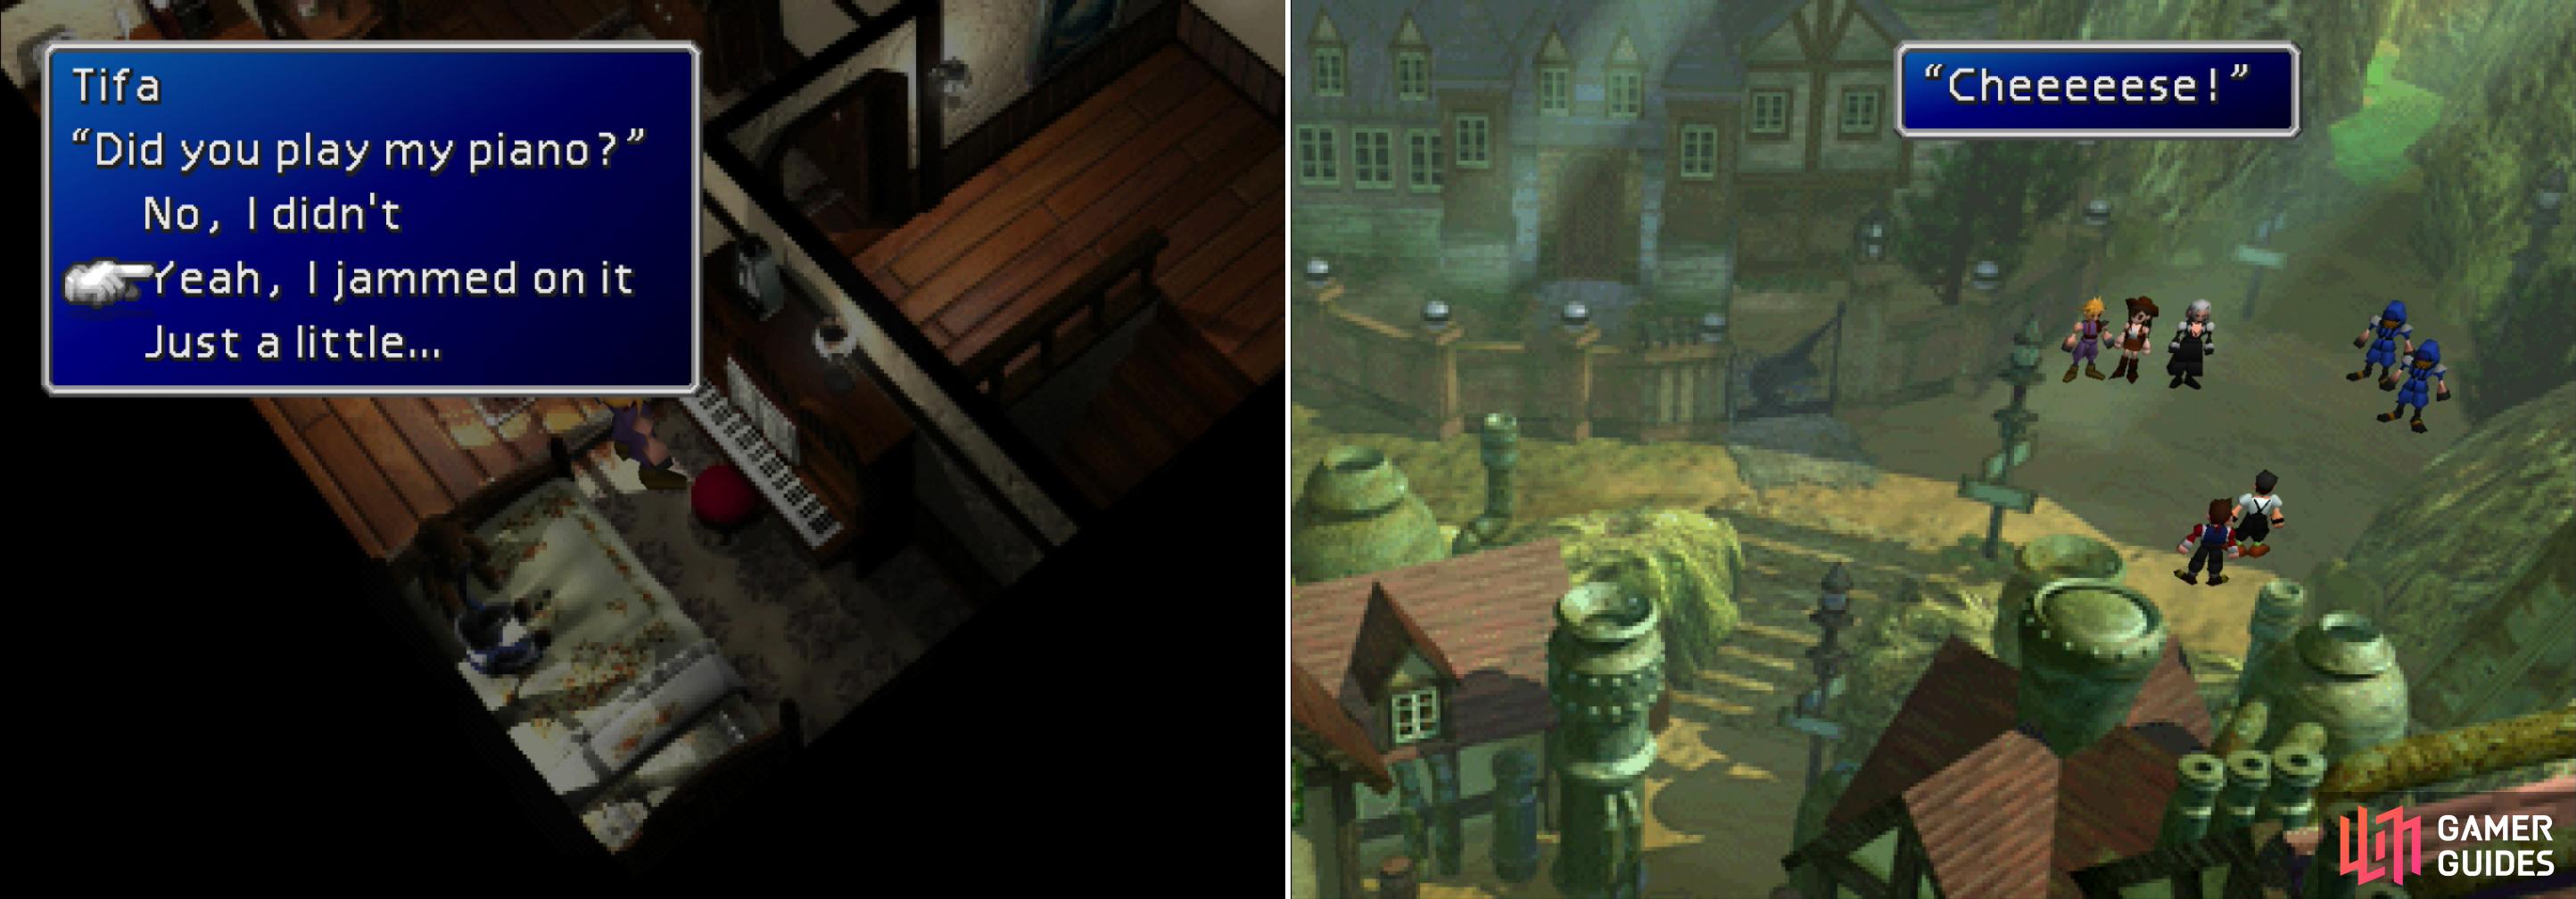 Say you “jammed on” Tifa’s piano to get rewards much, much later on (left). Before getting to work, pause for a fateful photo shoot (right).